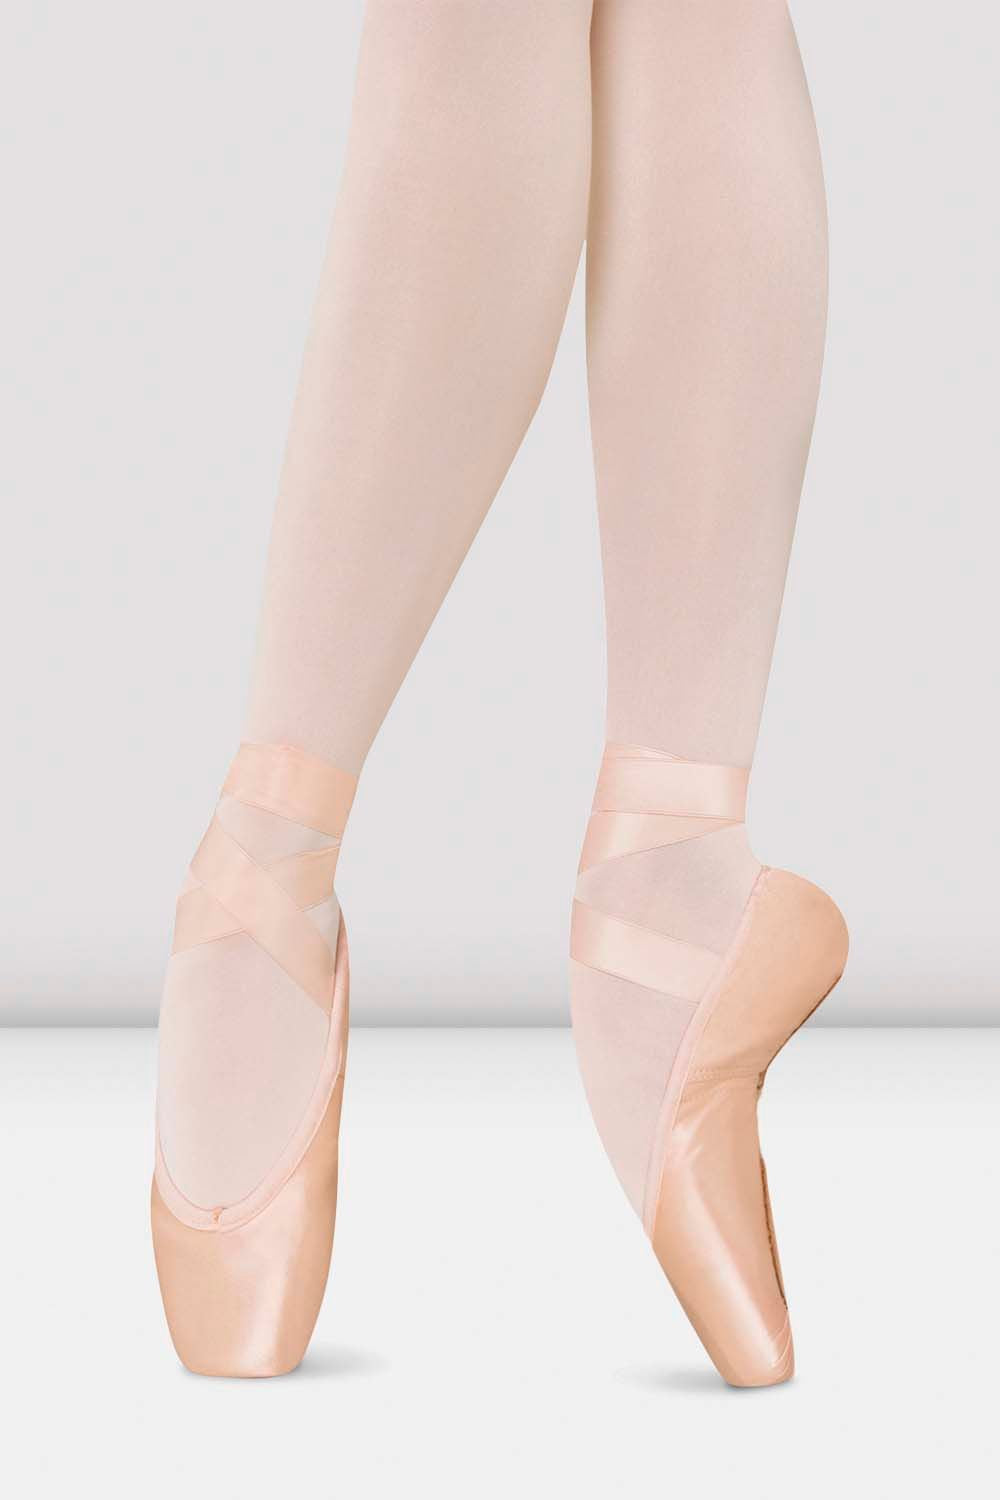 NEW Ladies Professional Satin Ballet Pointe Shoes Ribbon Dance Toe Shoe All  Size